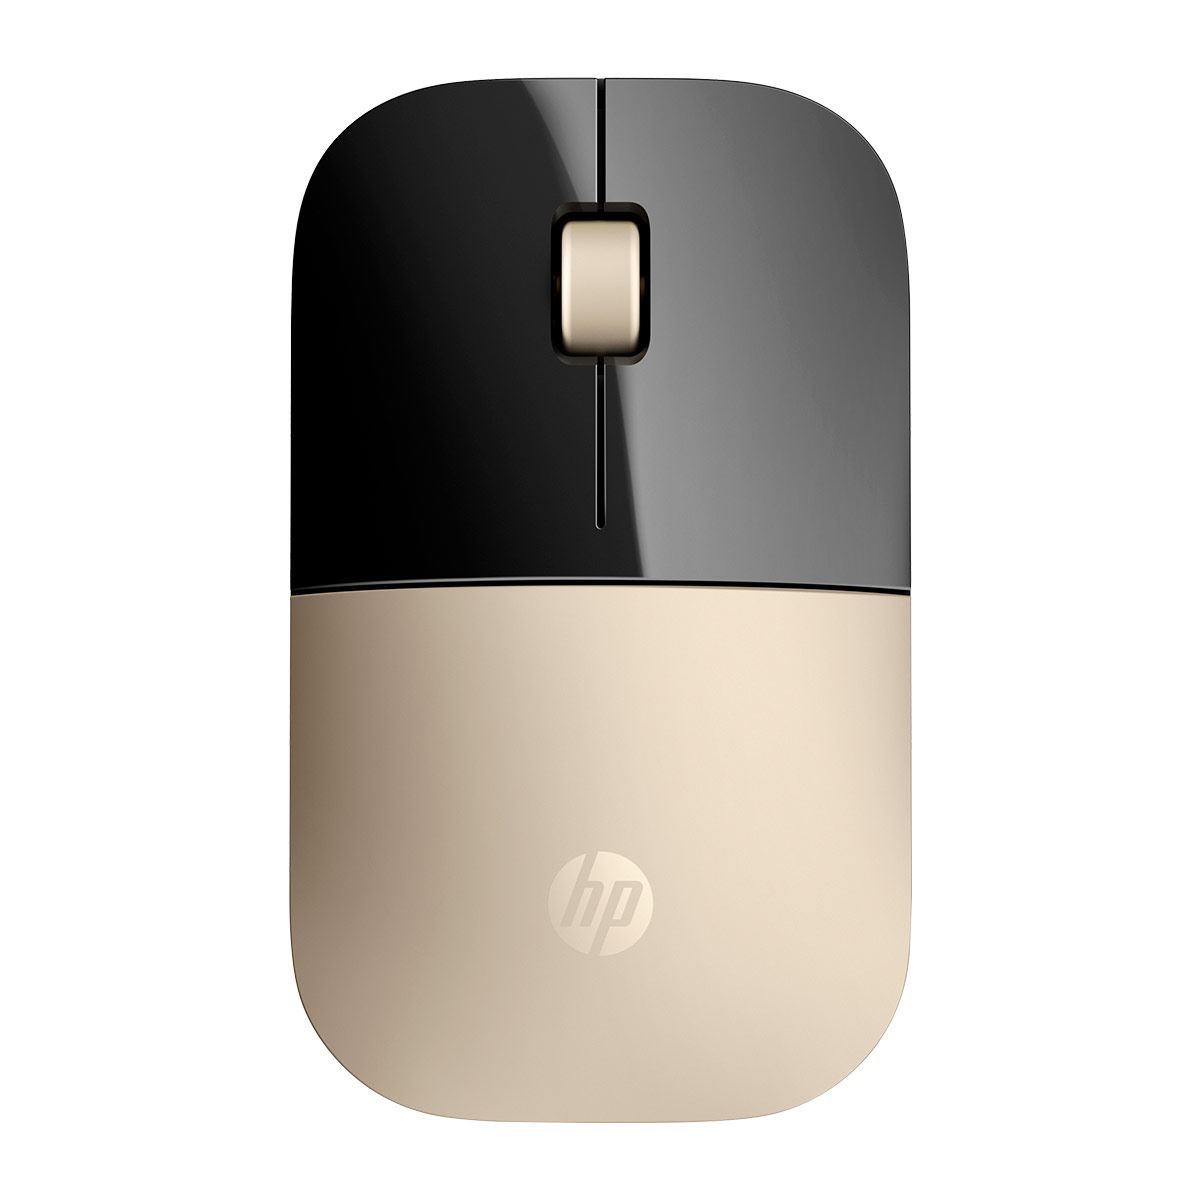 Mouse HP Z3700 Oro